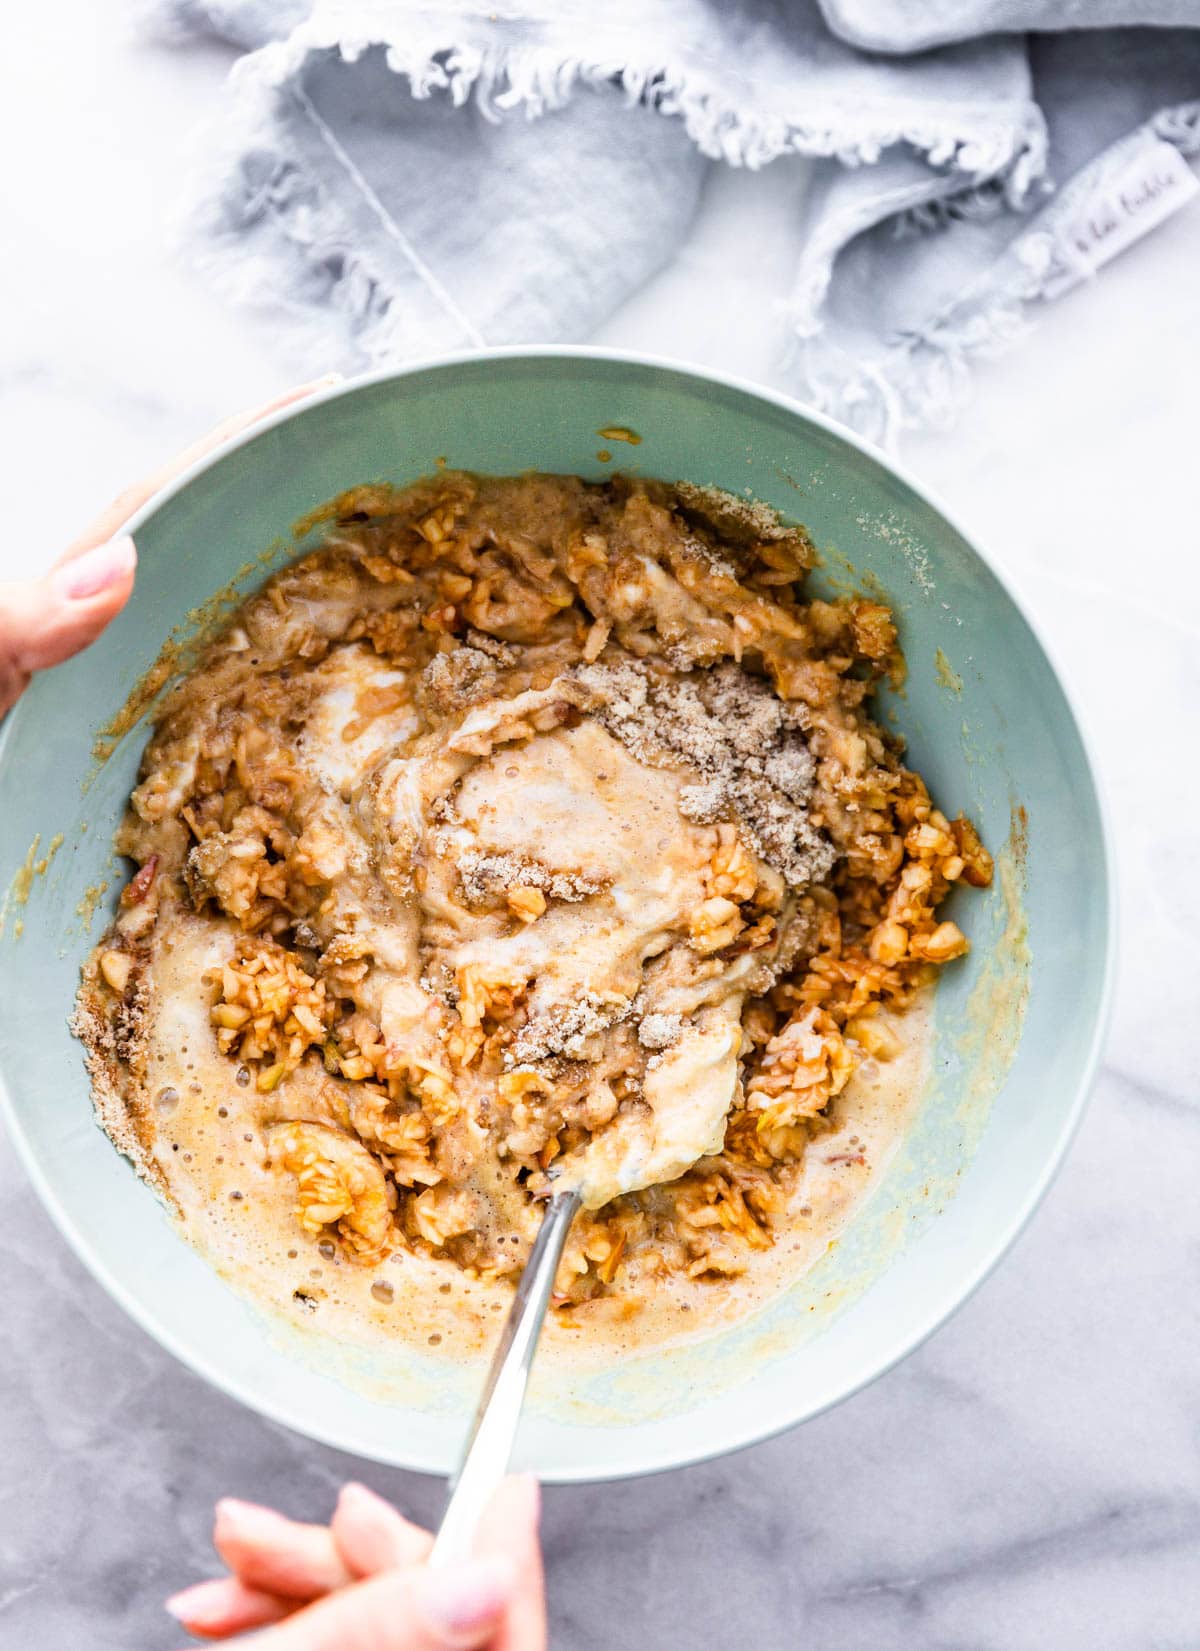 Apple coffee cake batter in light blue mixing bowl